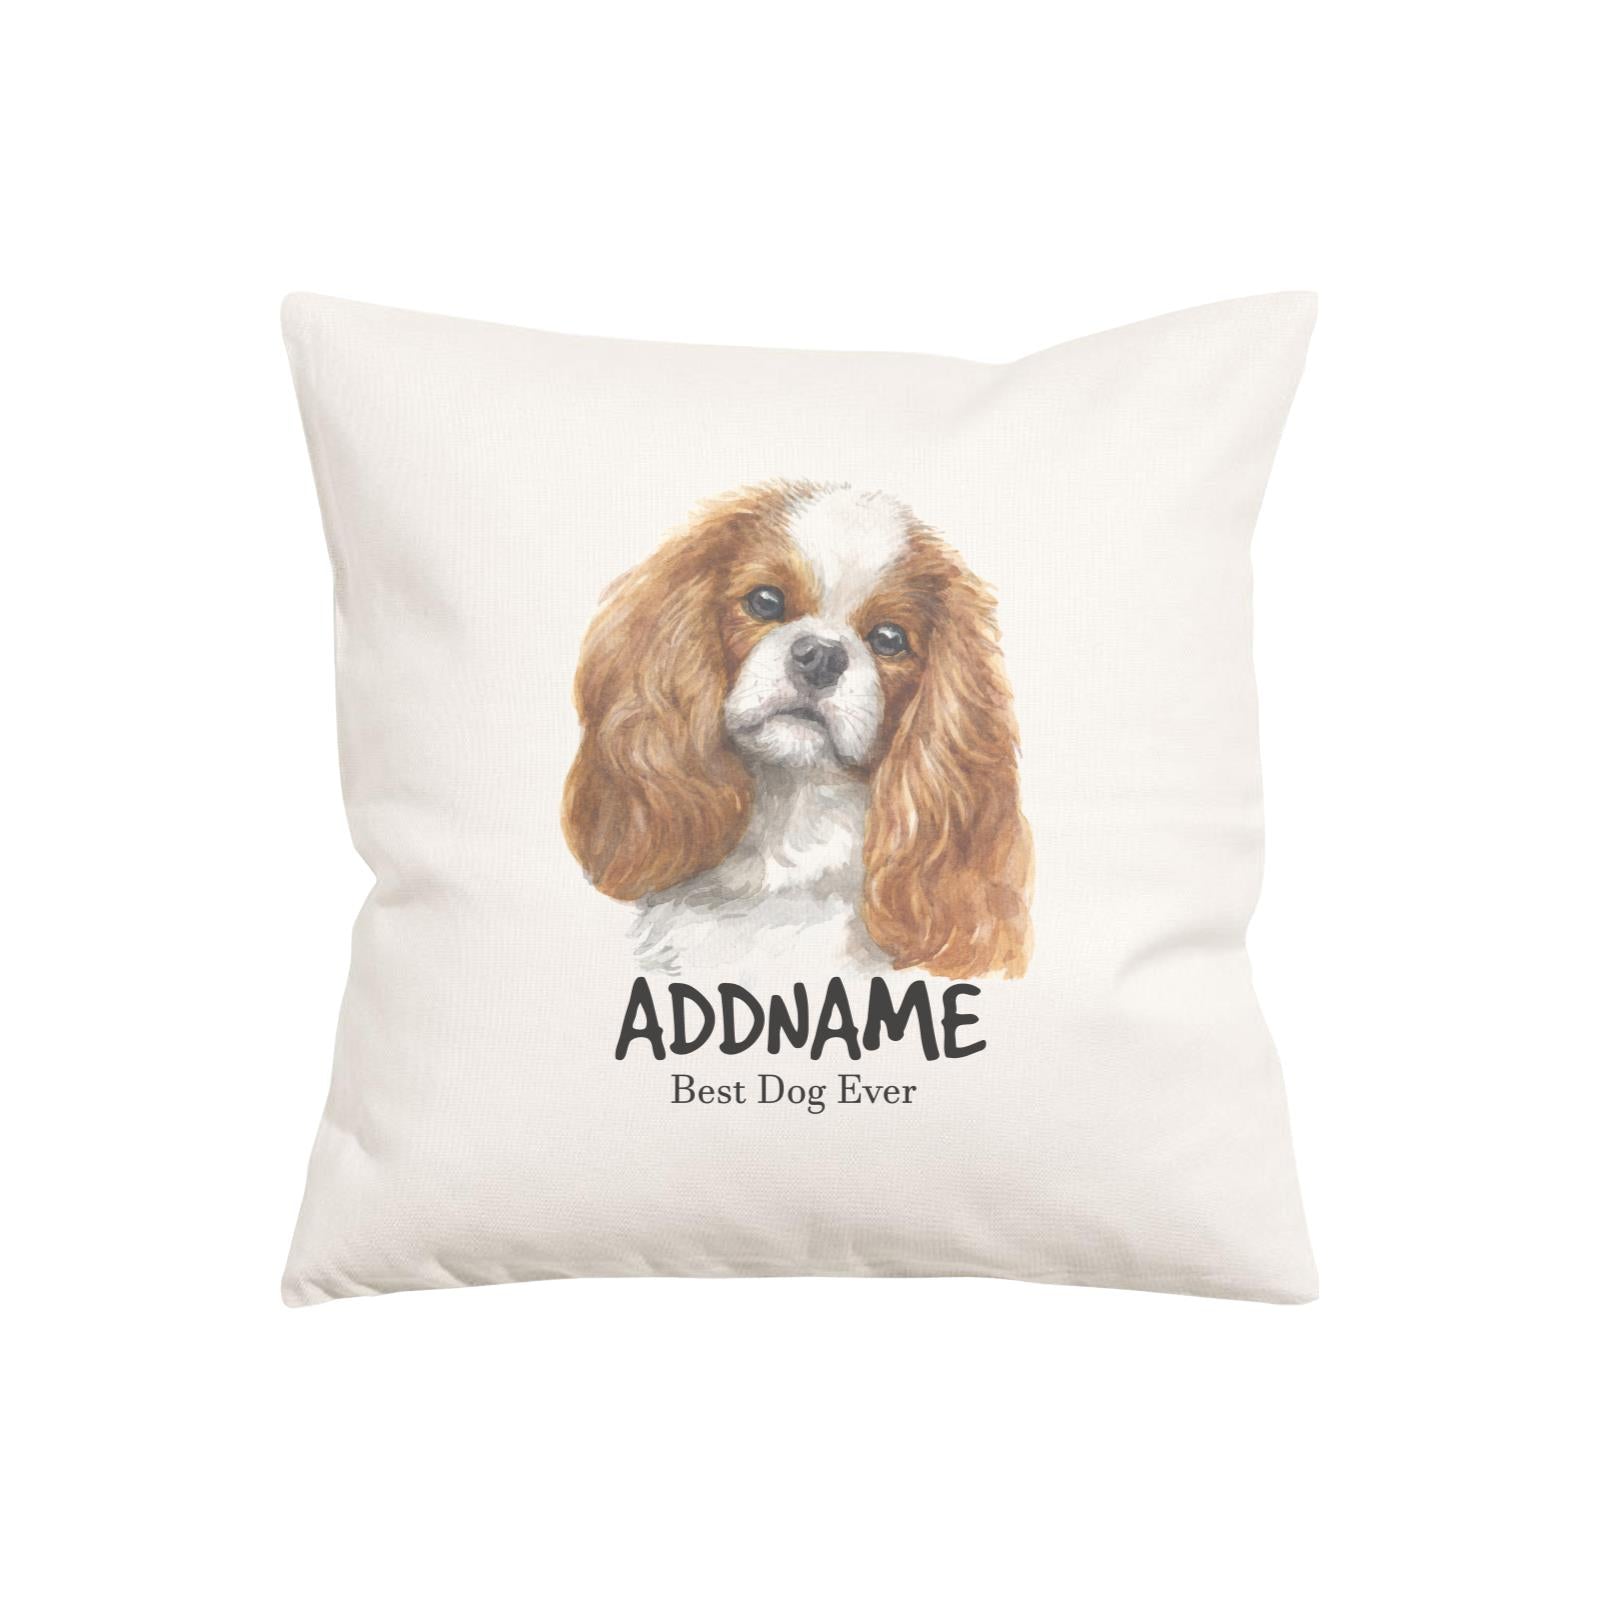 Watercolor Dog Series King Charles Spaniel Best Dog Ever Addname Pillow Cushion